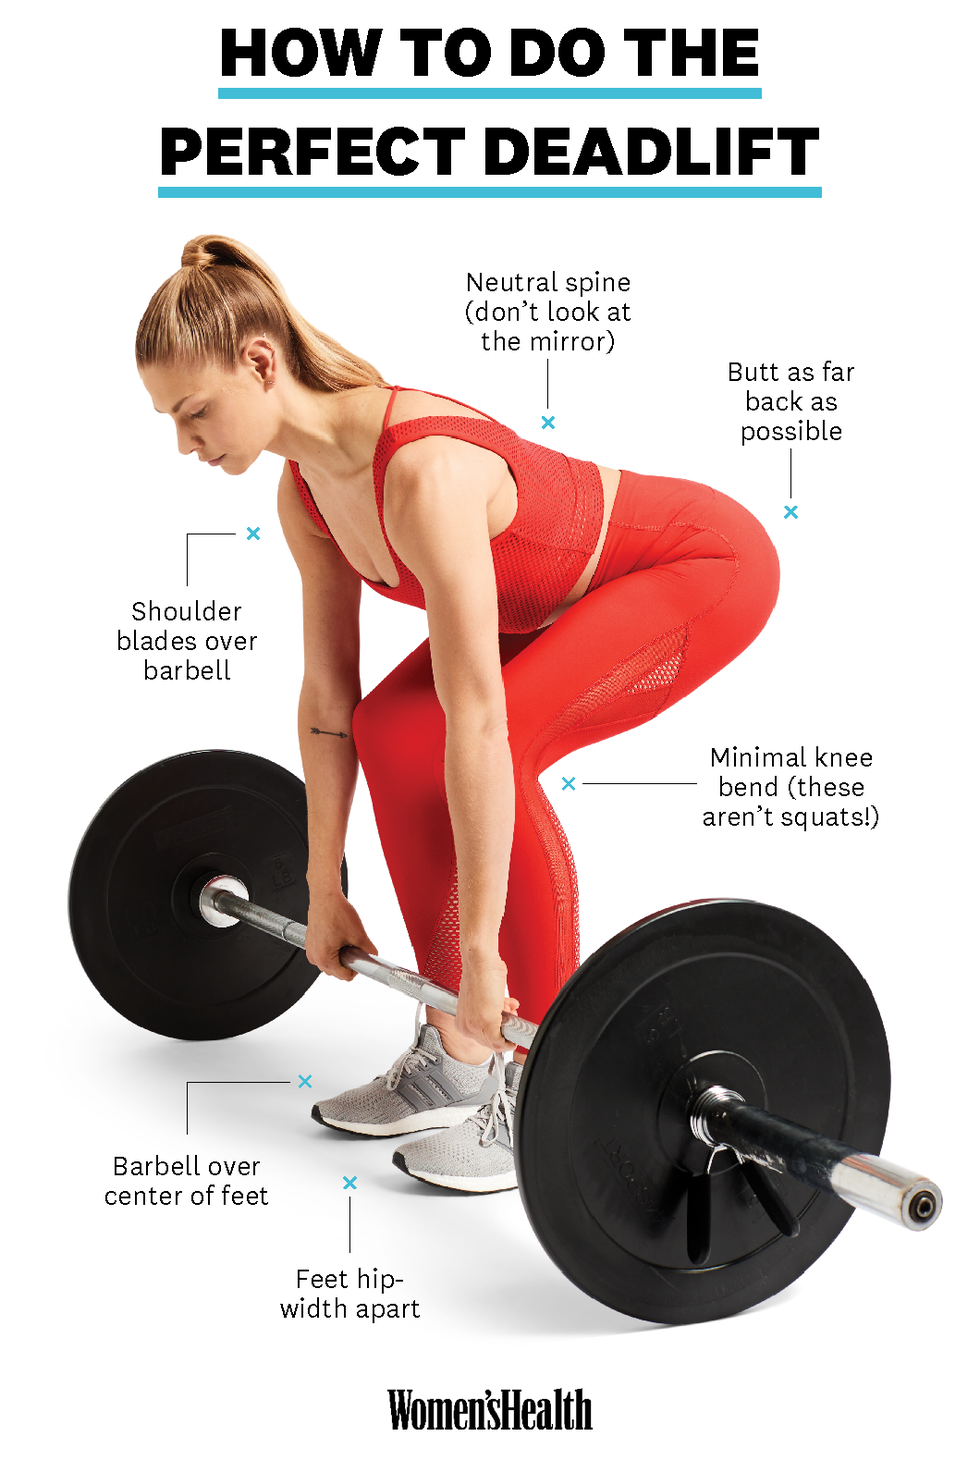 How To Deadlift Properly - Trainers Share Form Tips, Variations